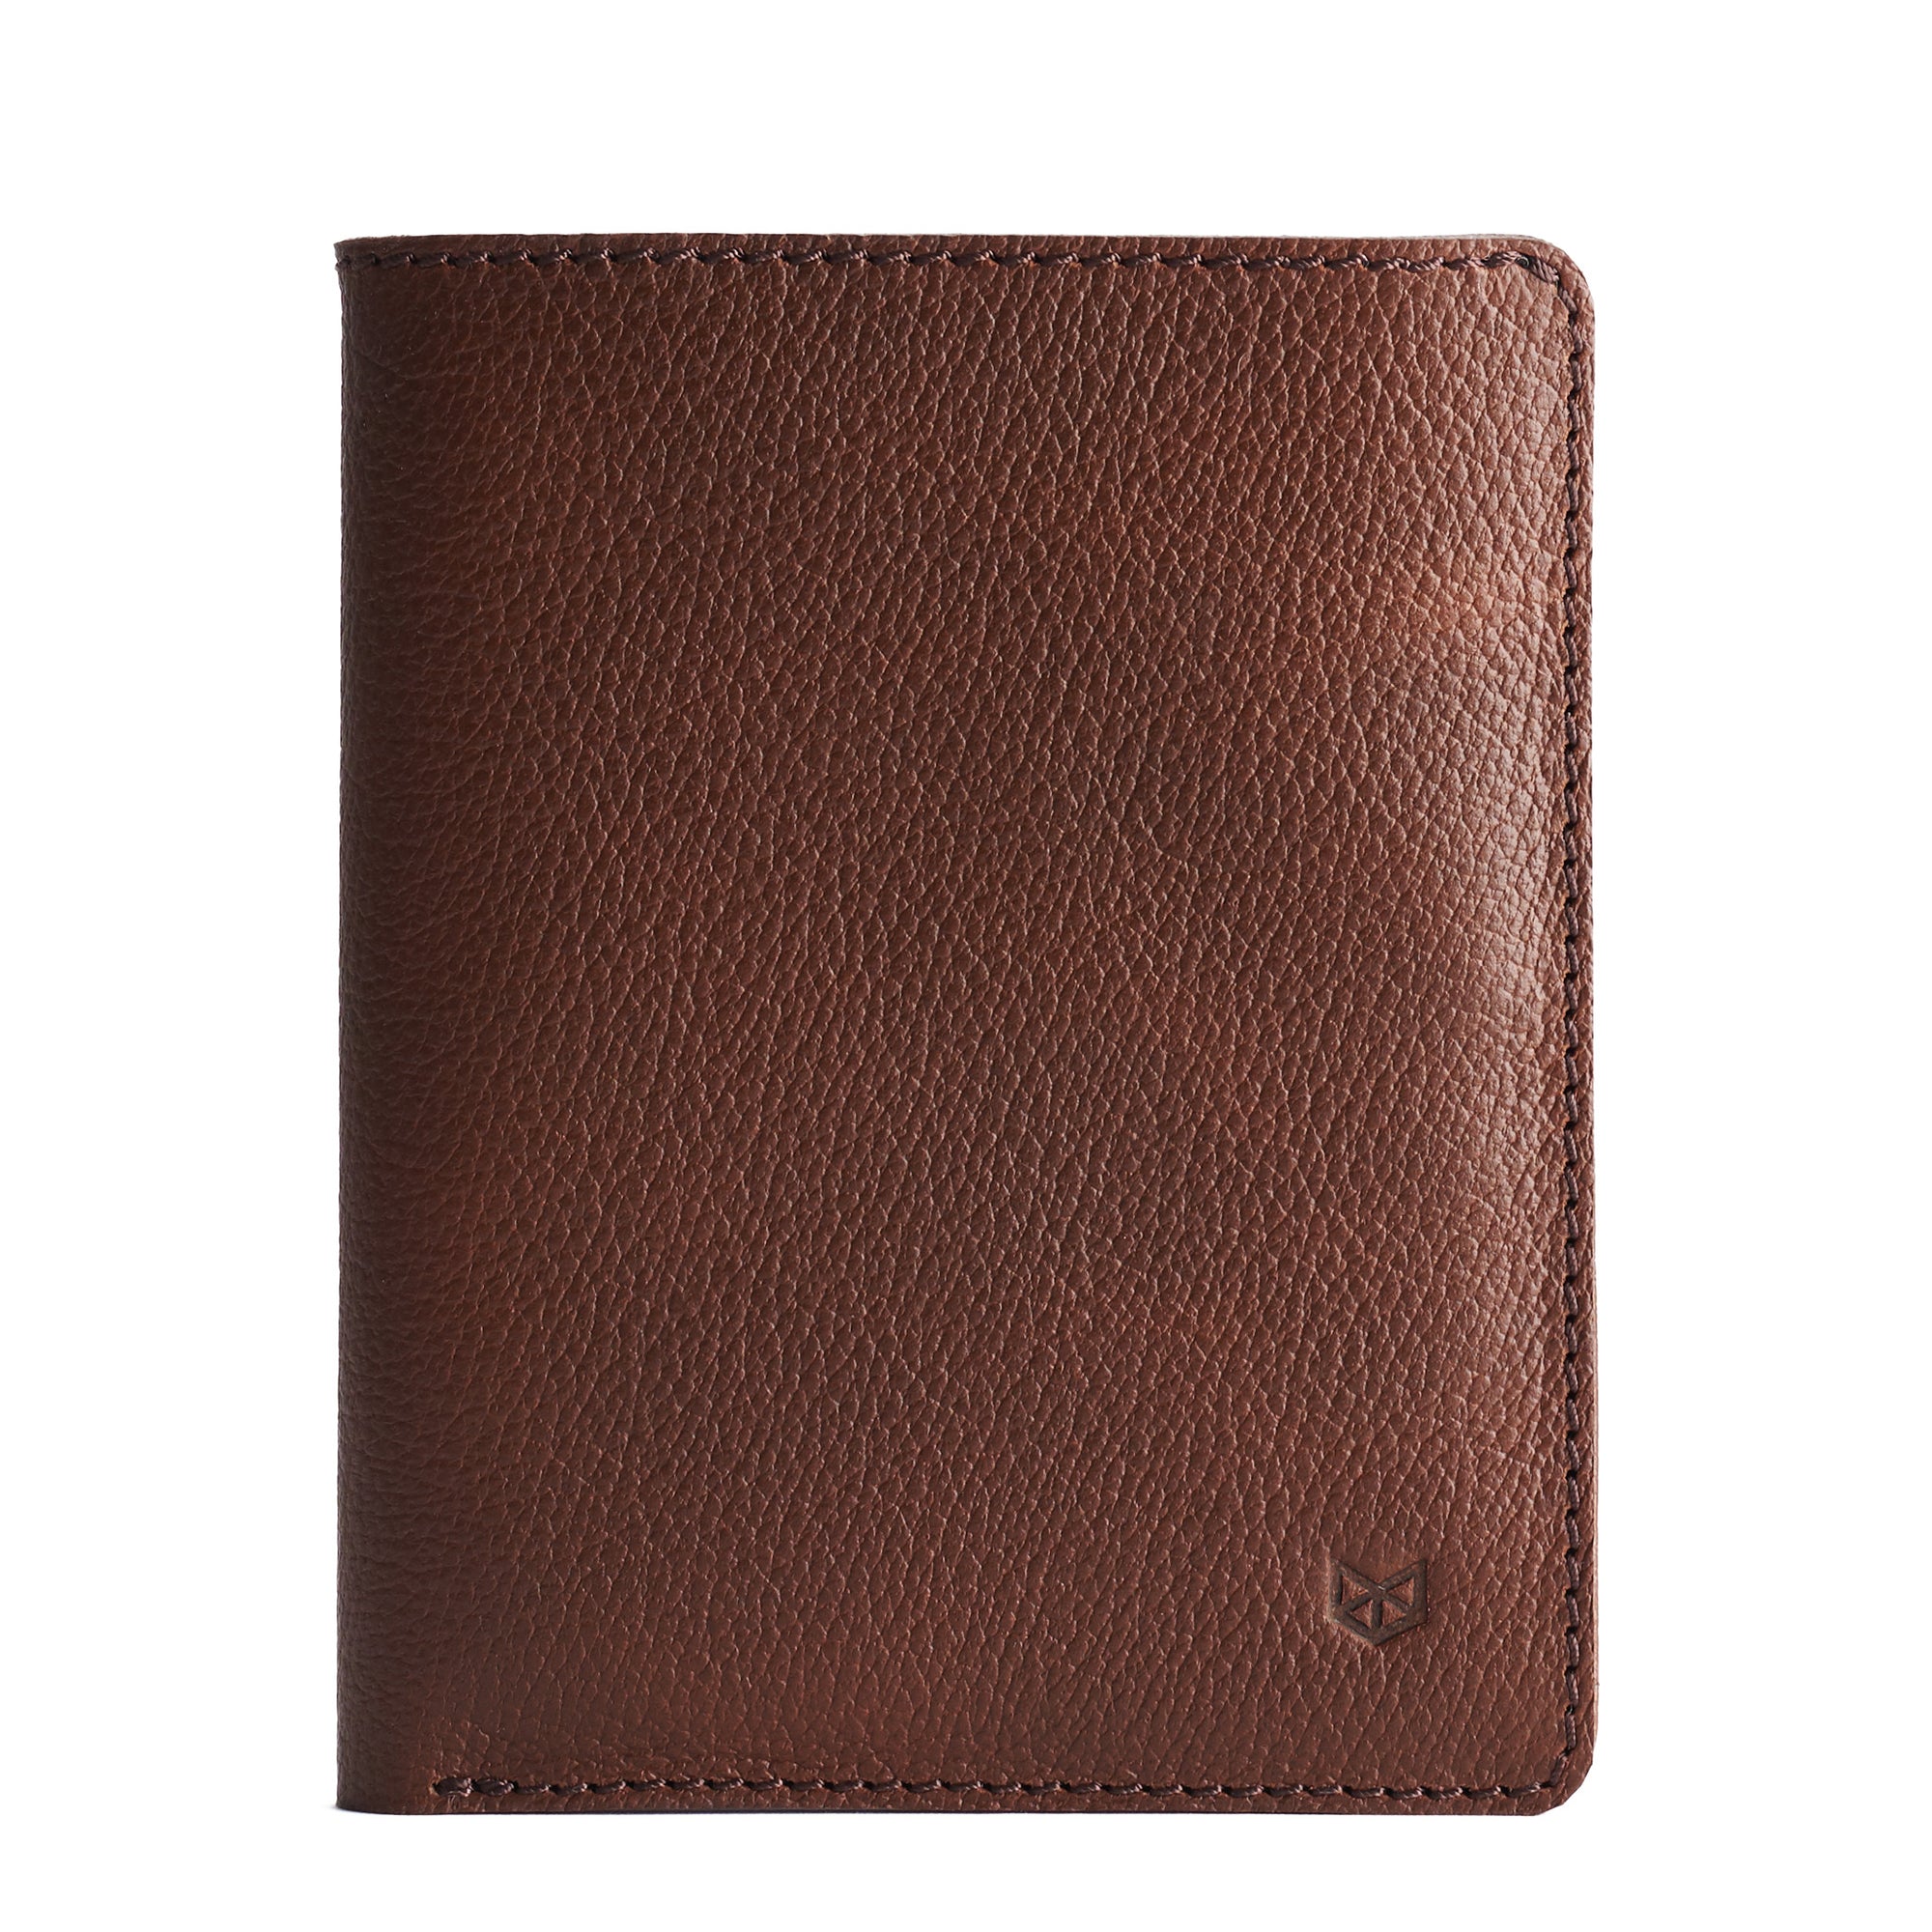 Cover. Pocket Passport Holder Travel Wallet Brown by Capra Leather